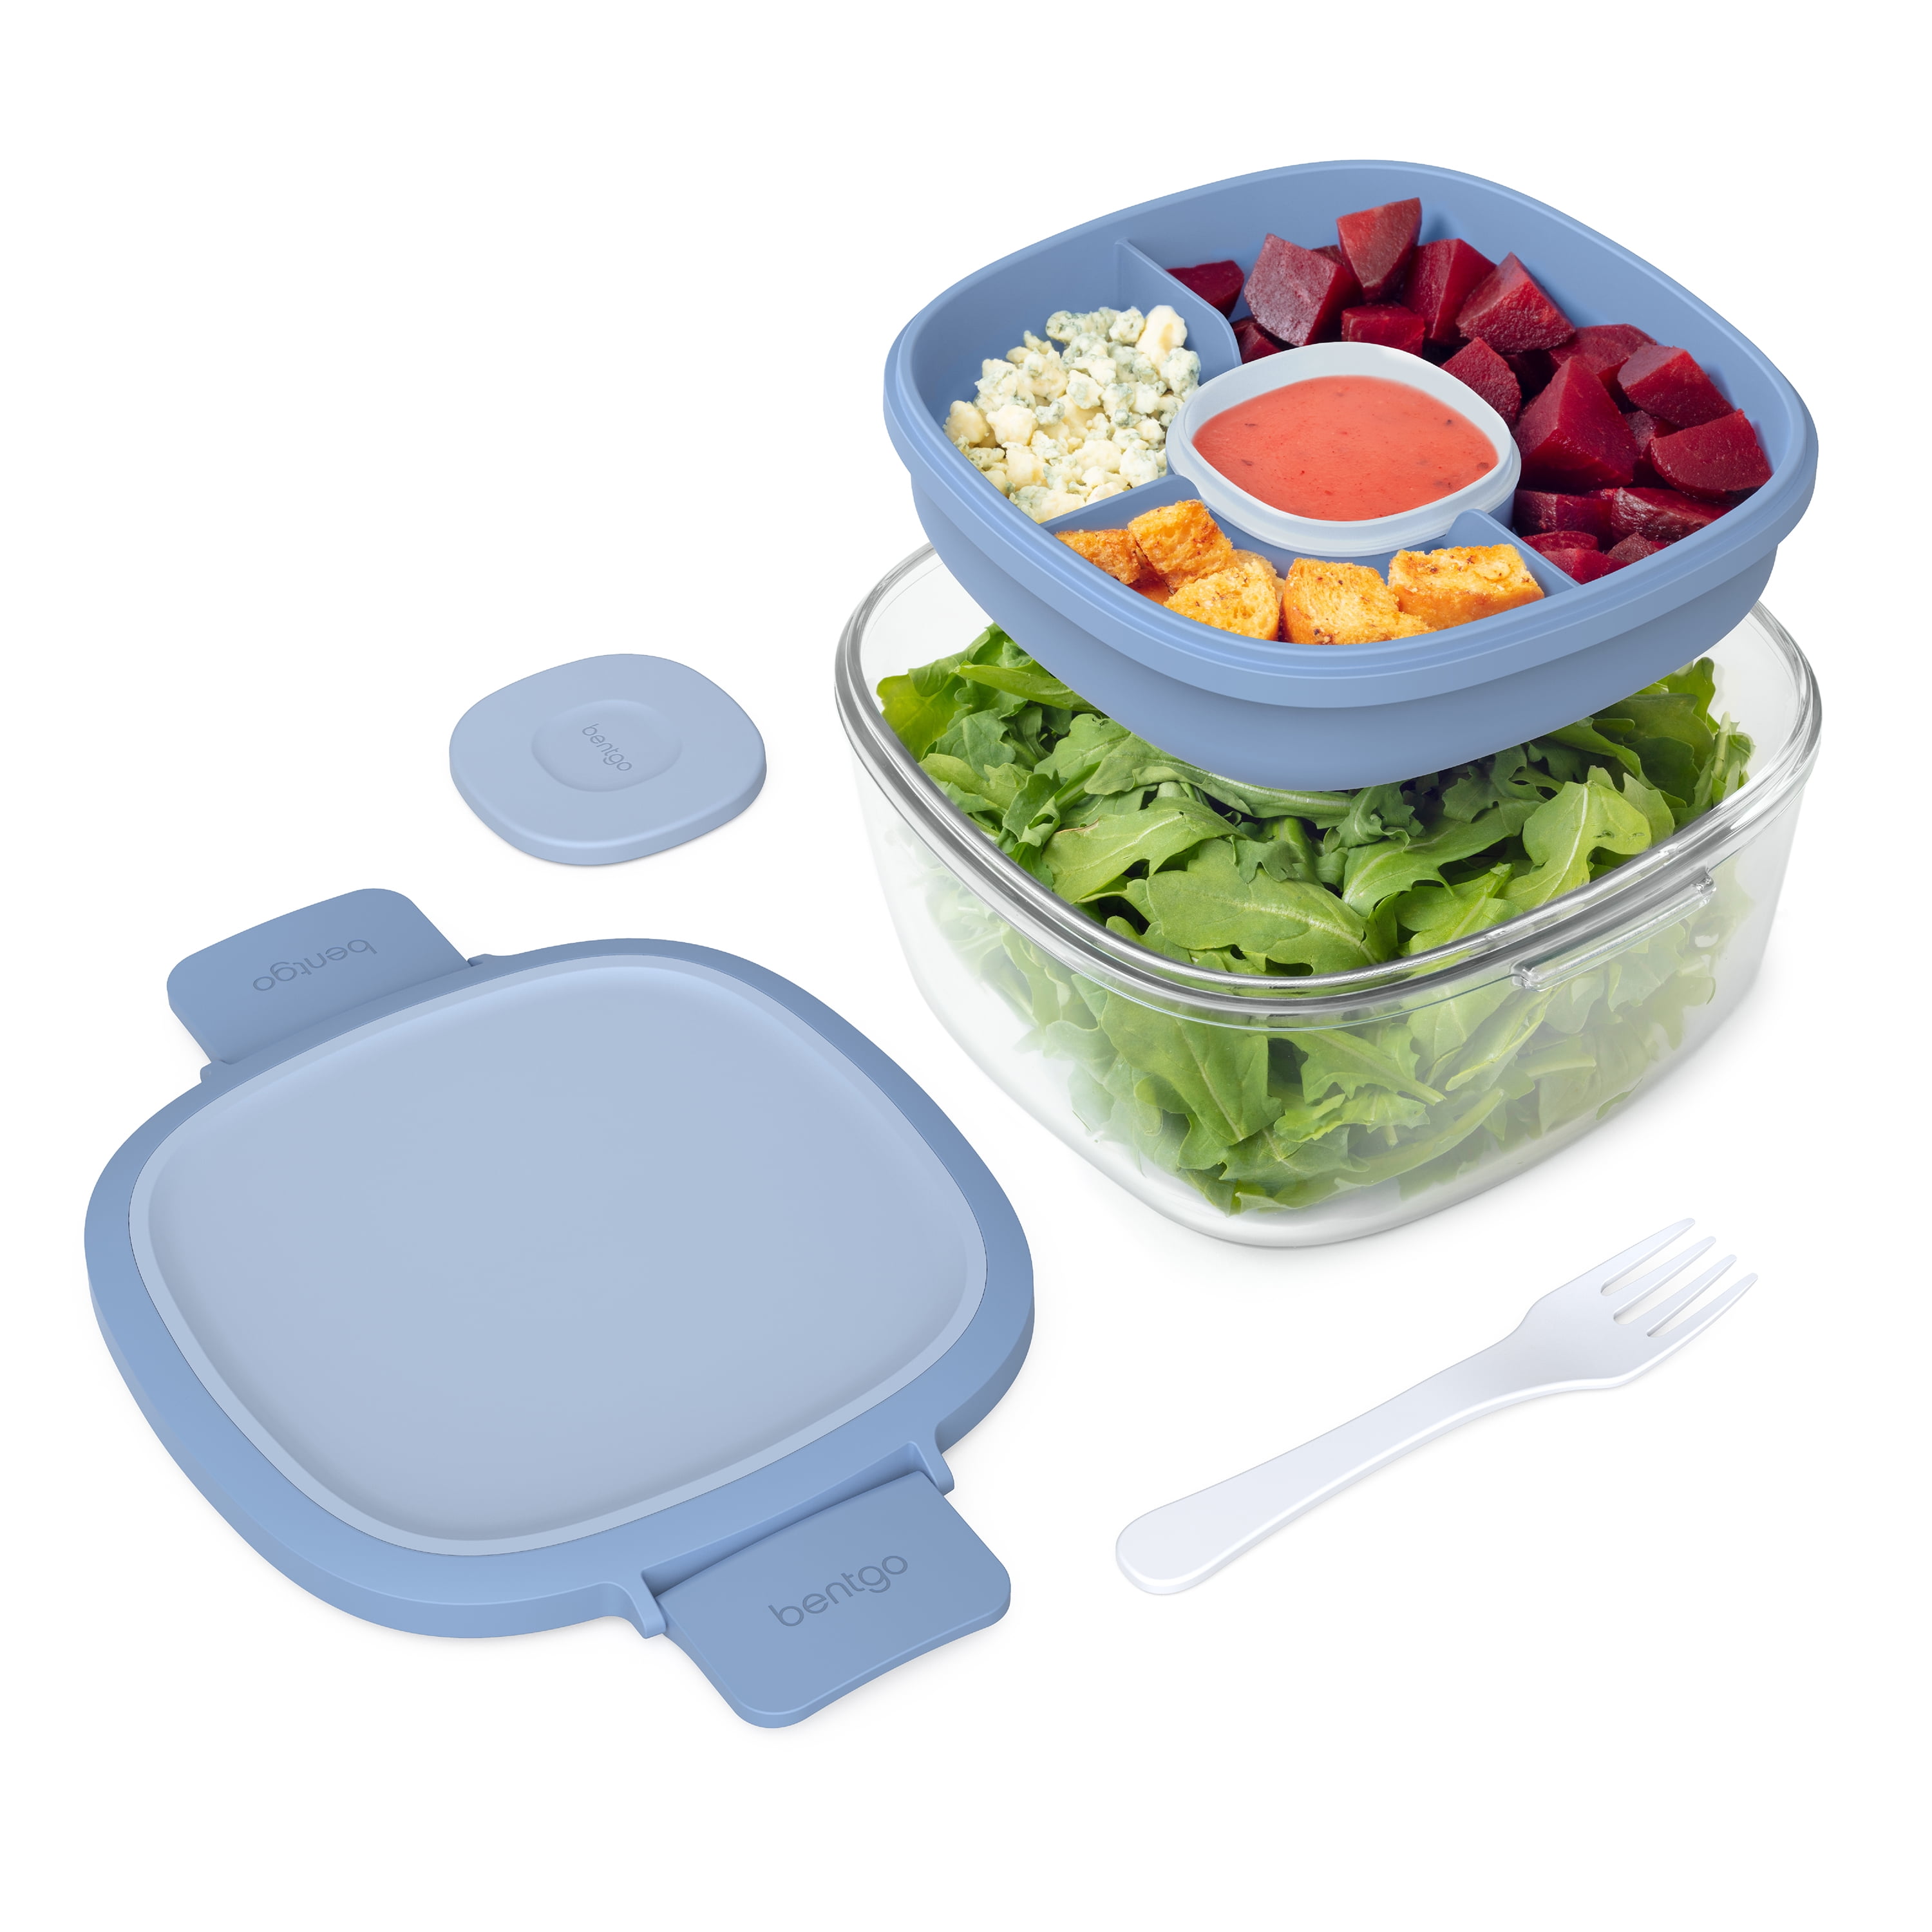 Loobuu 52 oz to Go Salad Container Lunch Container, BPA-Free, 3-Compartment  for Salad Toppings and Snacks, Salad Bowl with Dressing Container, Built-in  Reusable Spoon, Microwave Safe Navy Blue 